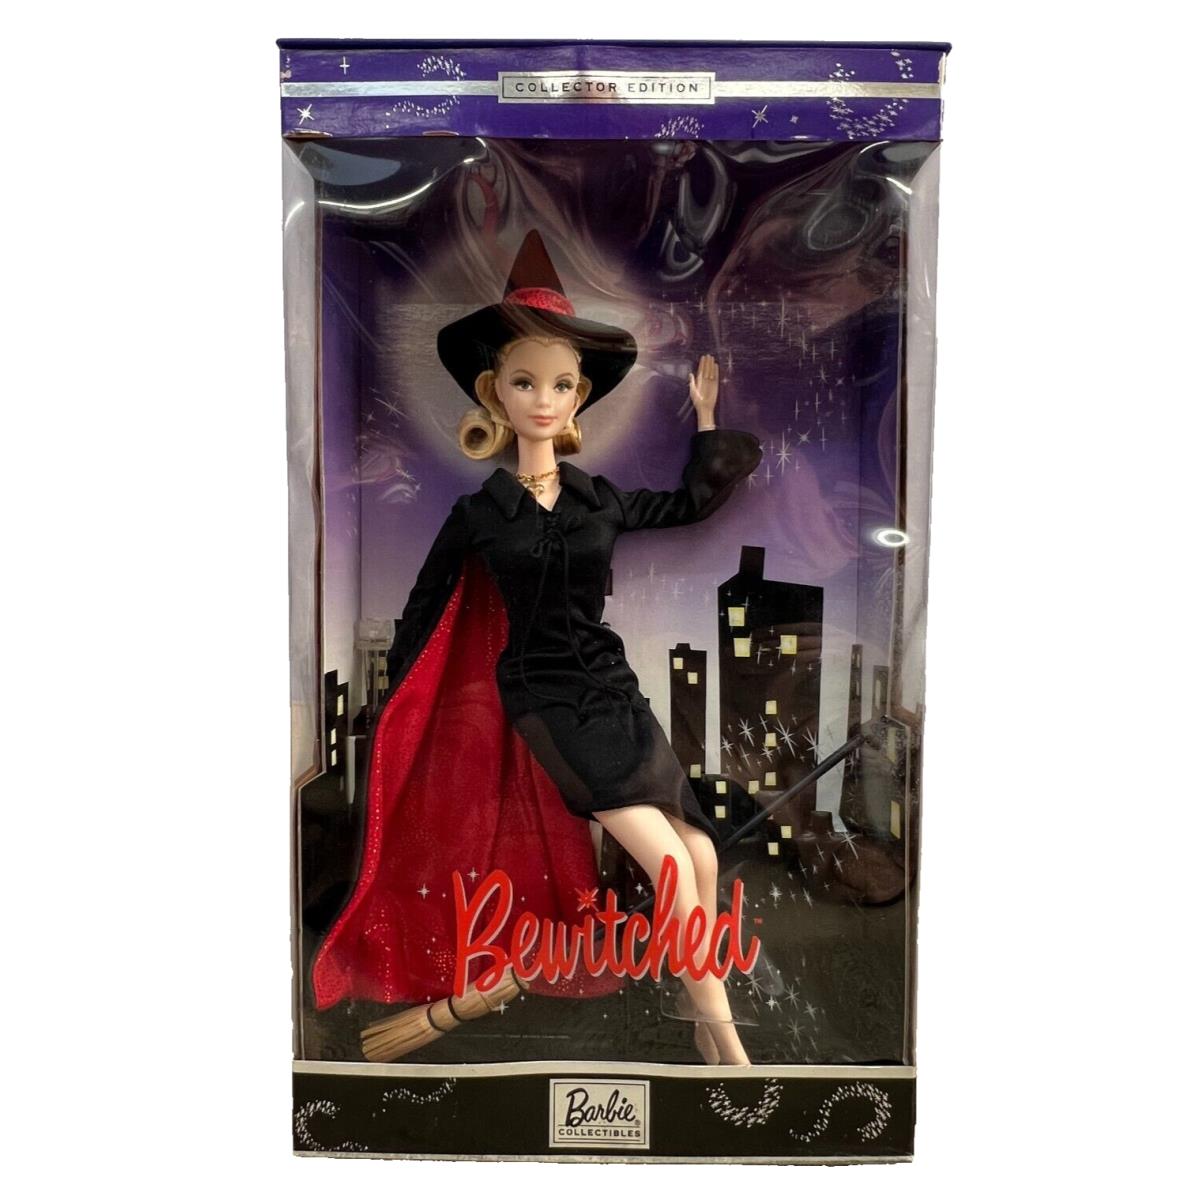 Bewitched Barbie Collector Edition Doll 2001 Elizabeth Montgomery 17